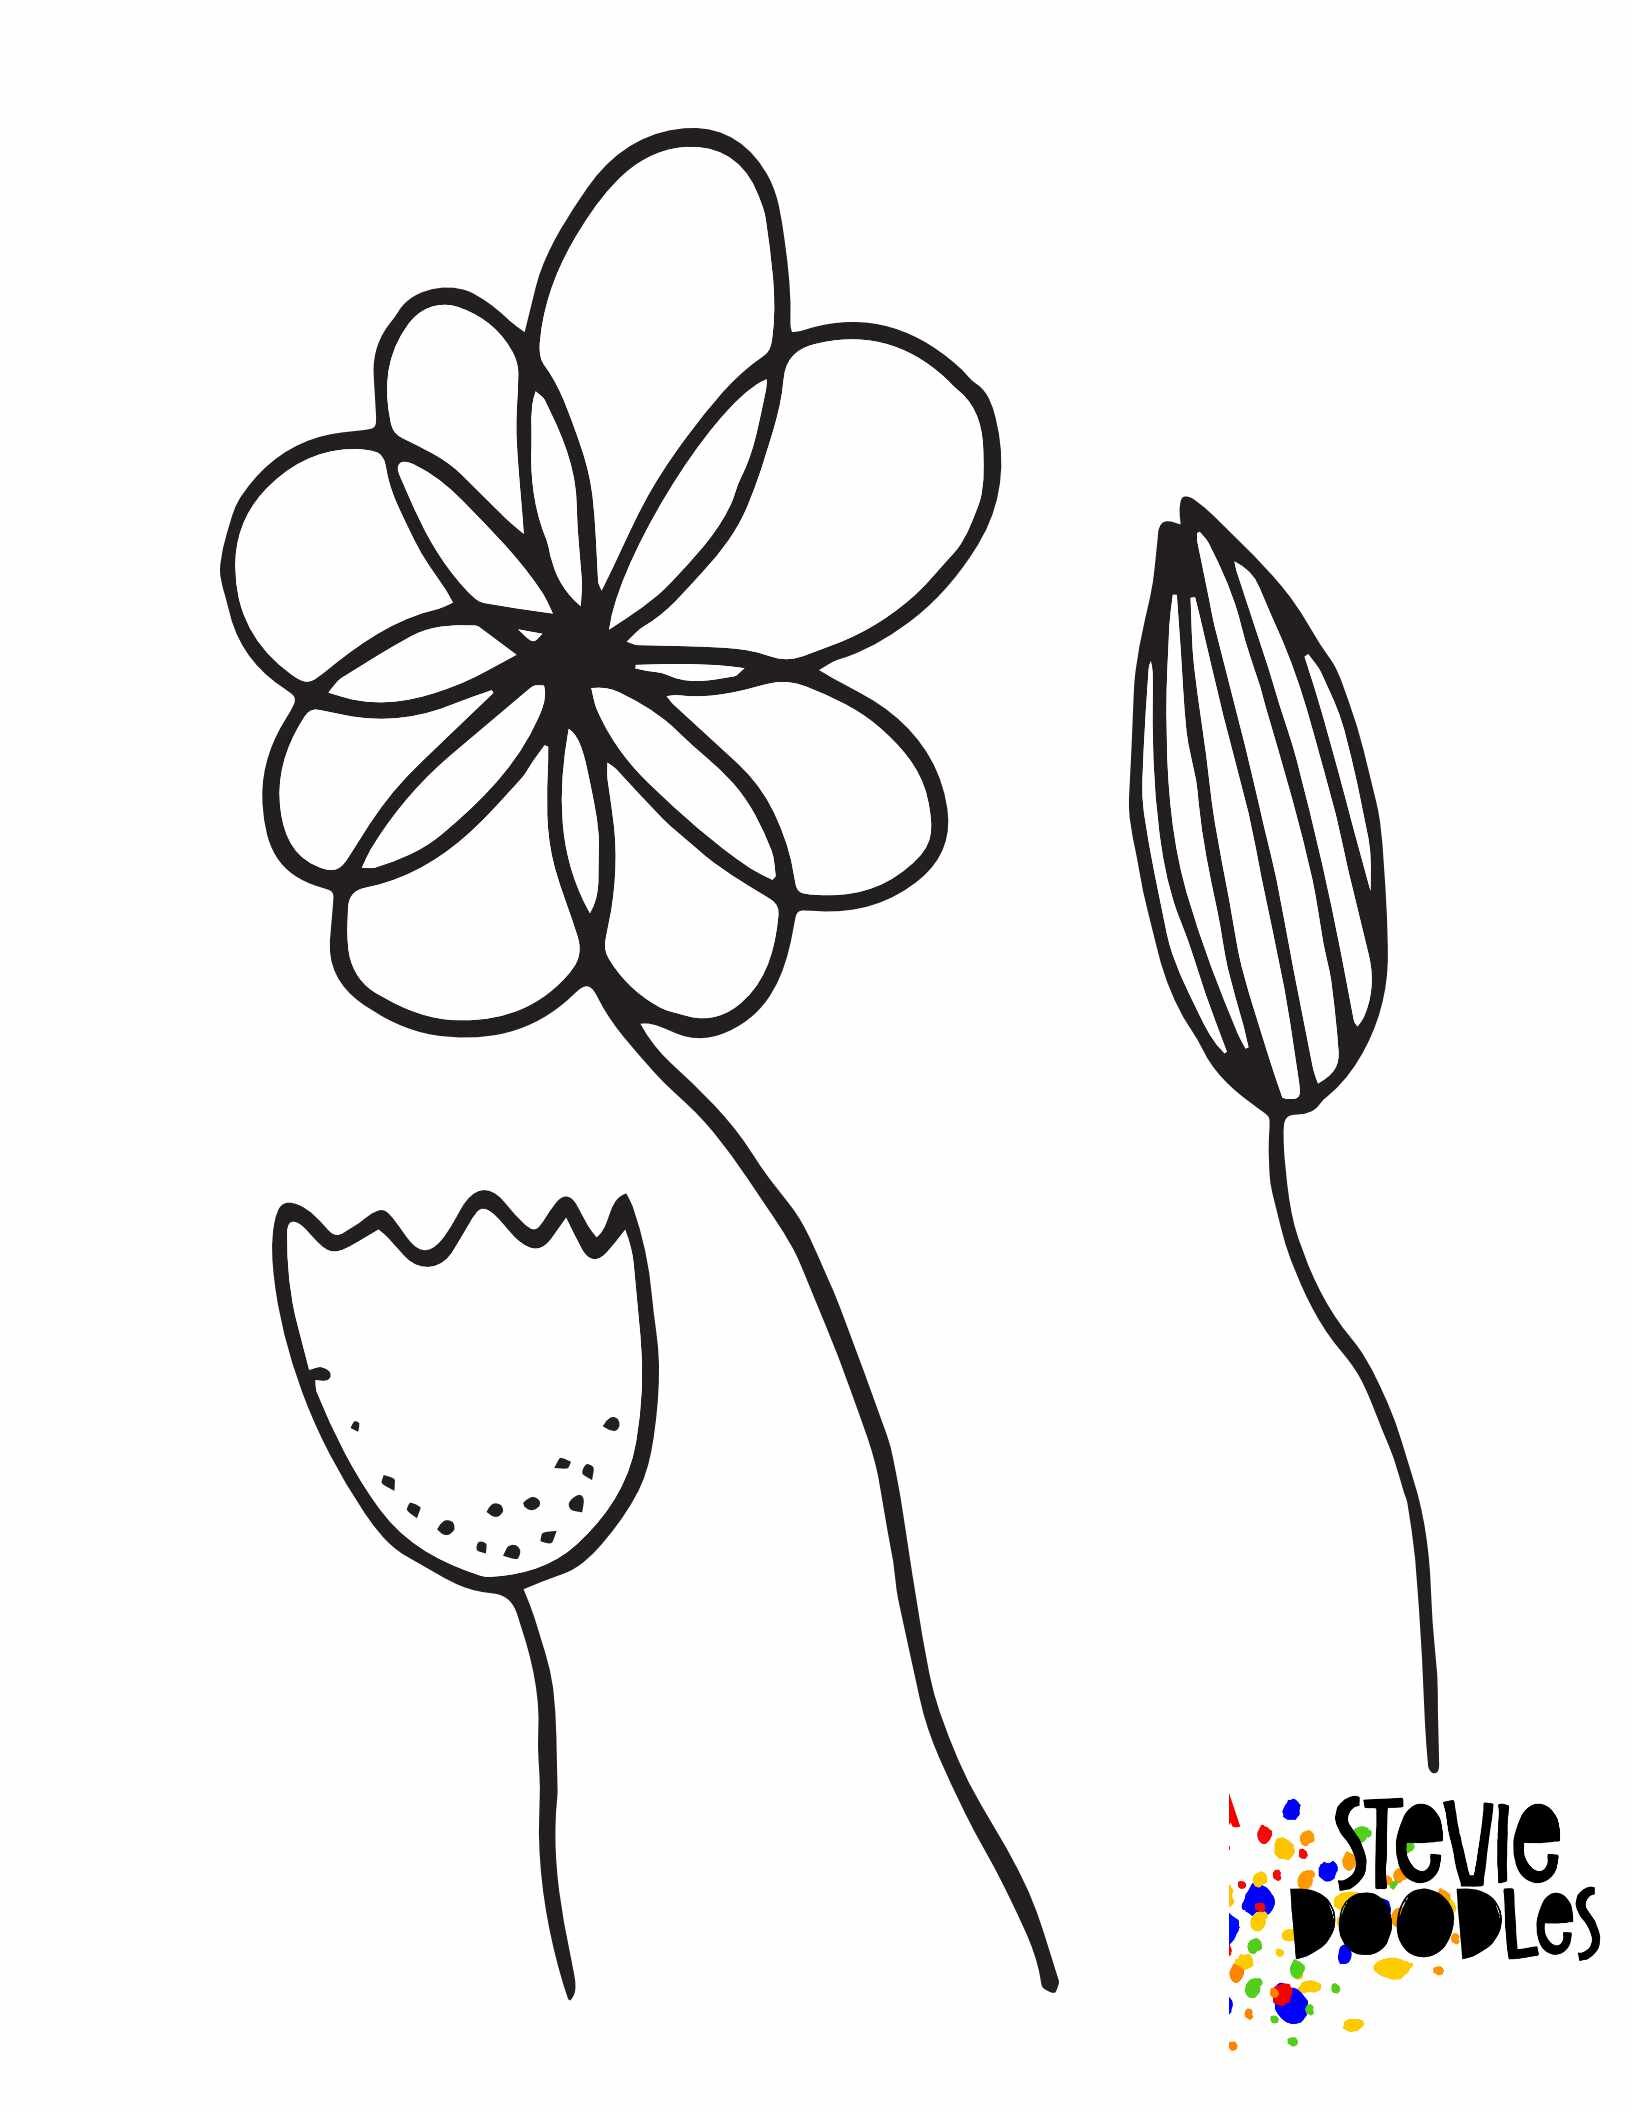 flower coloring page with 3 simple flowers